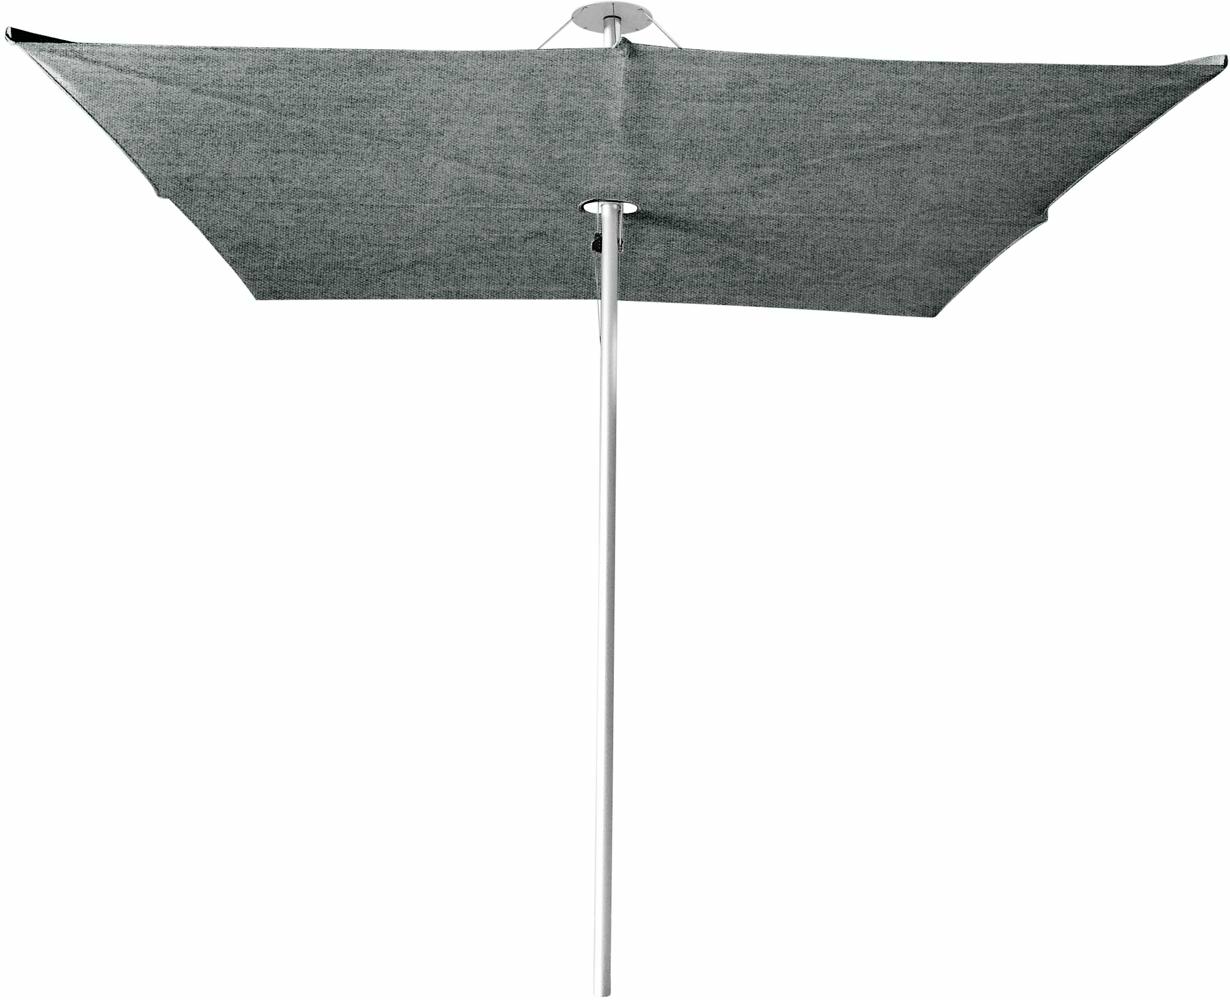 Infina center post umbrella, 2,5 m square, with frame in Aluminum and Solidum Flanelle canopy. 